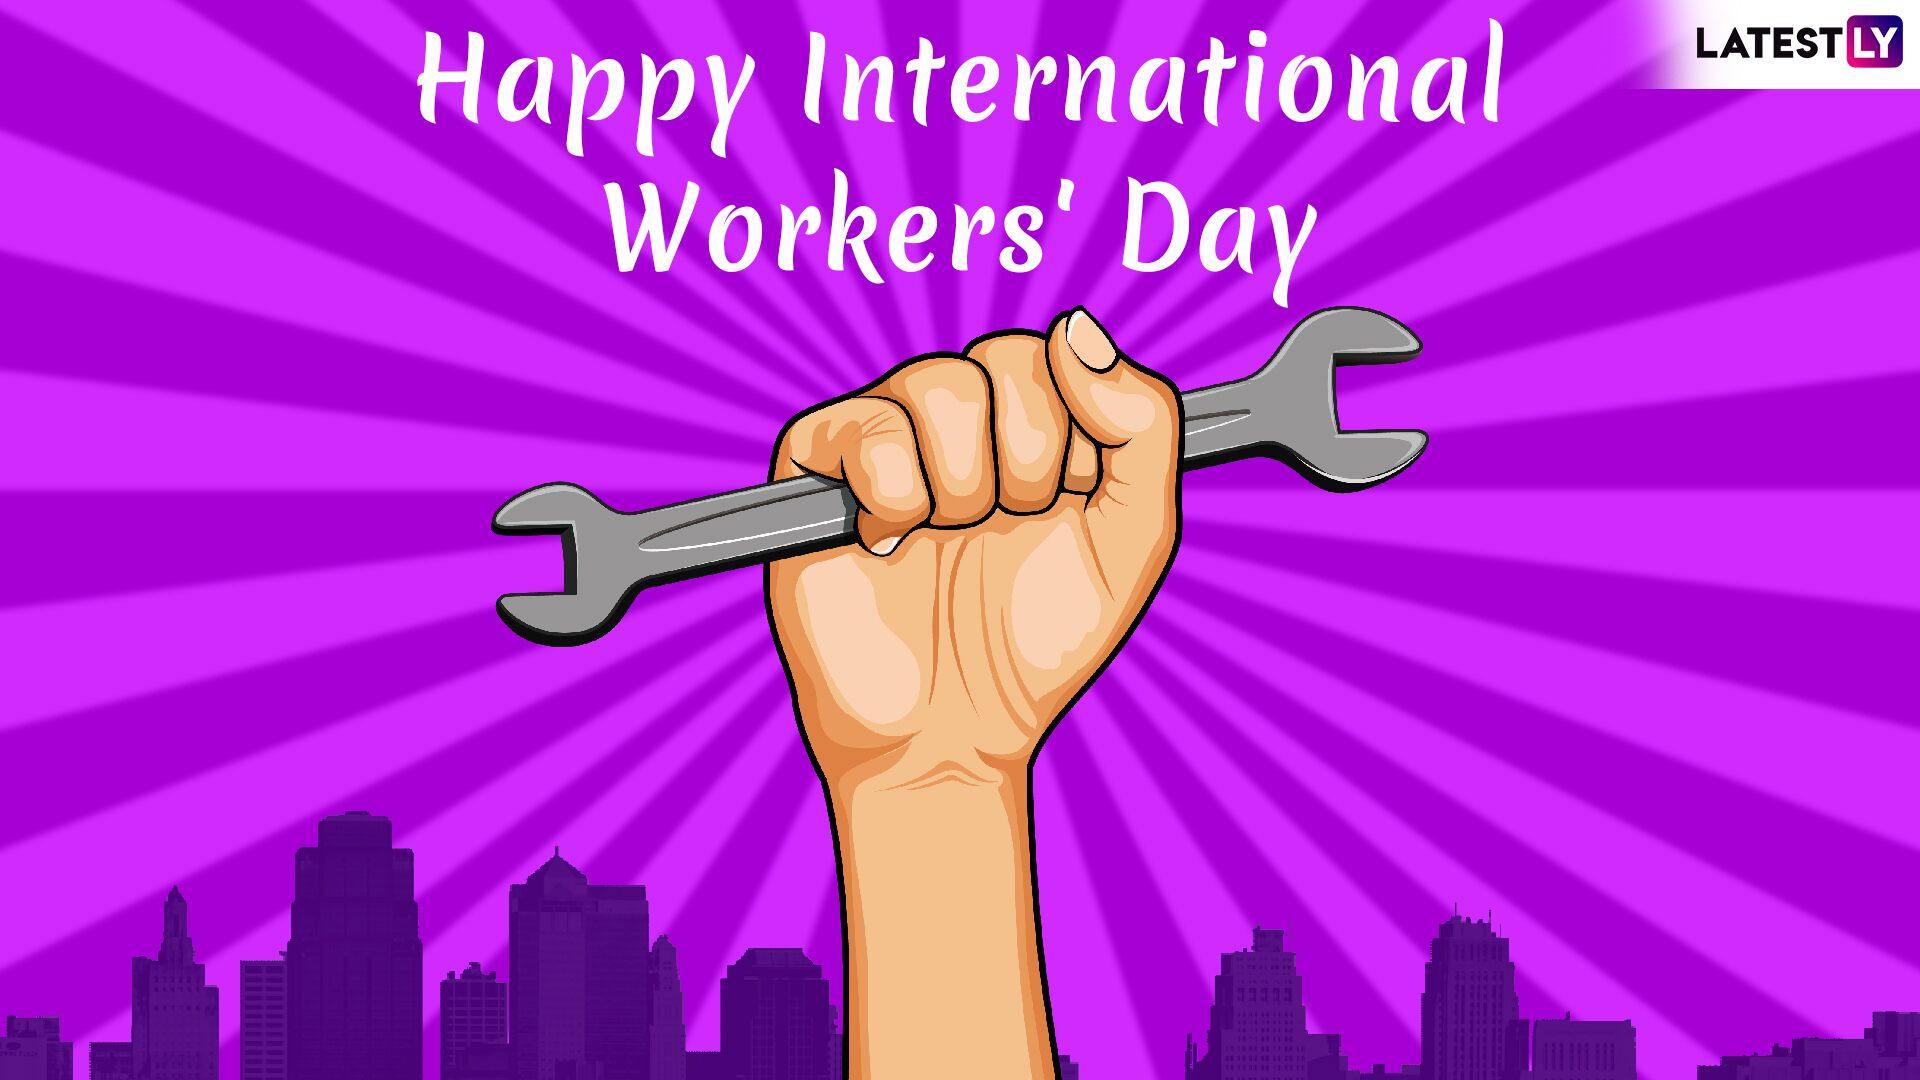 May working days. International workers' Day. International May Day. Happy May Day. 1 May International Day.